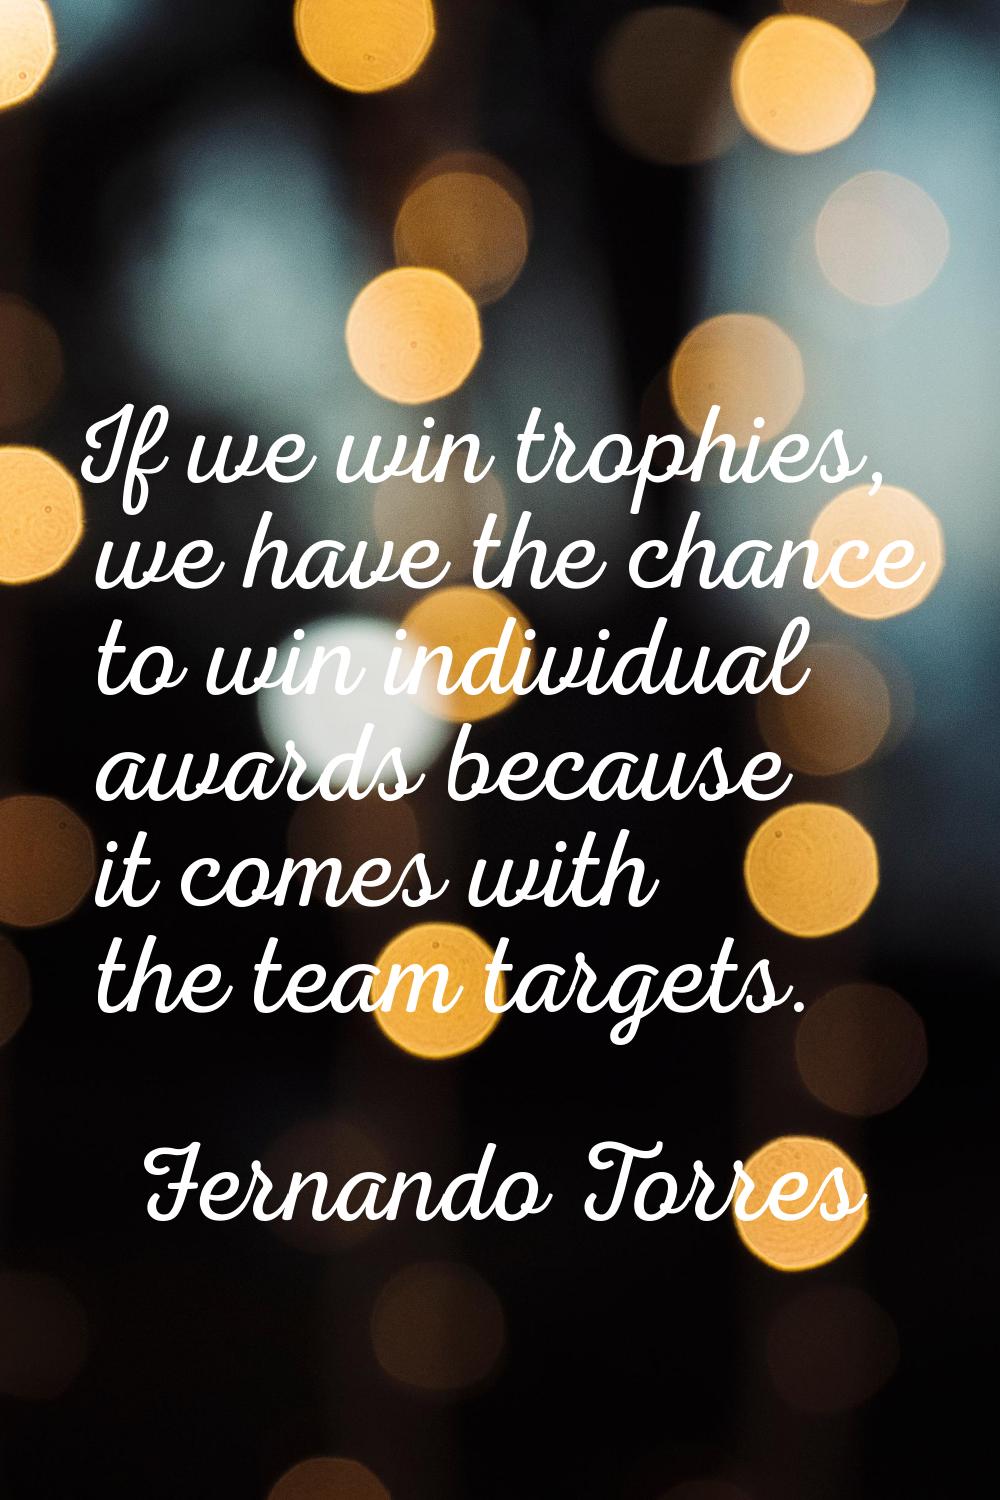 If we win trophies, we have the chance to win individual awards because it comes with the team targ